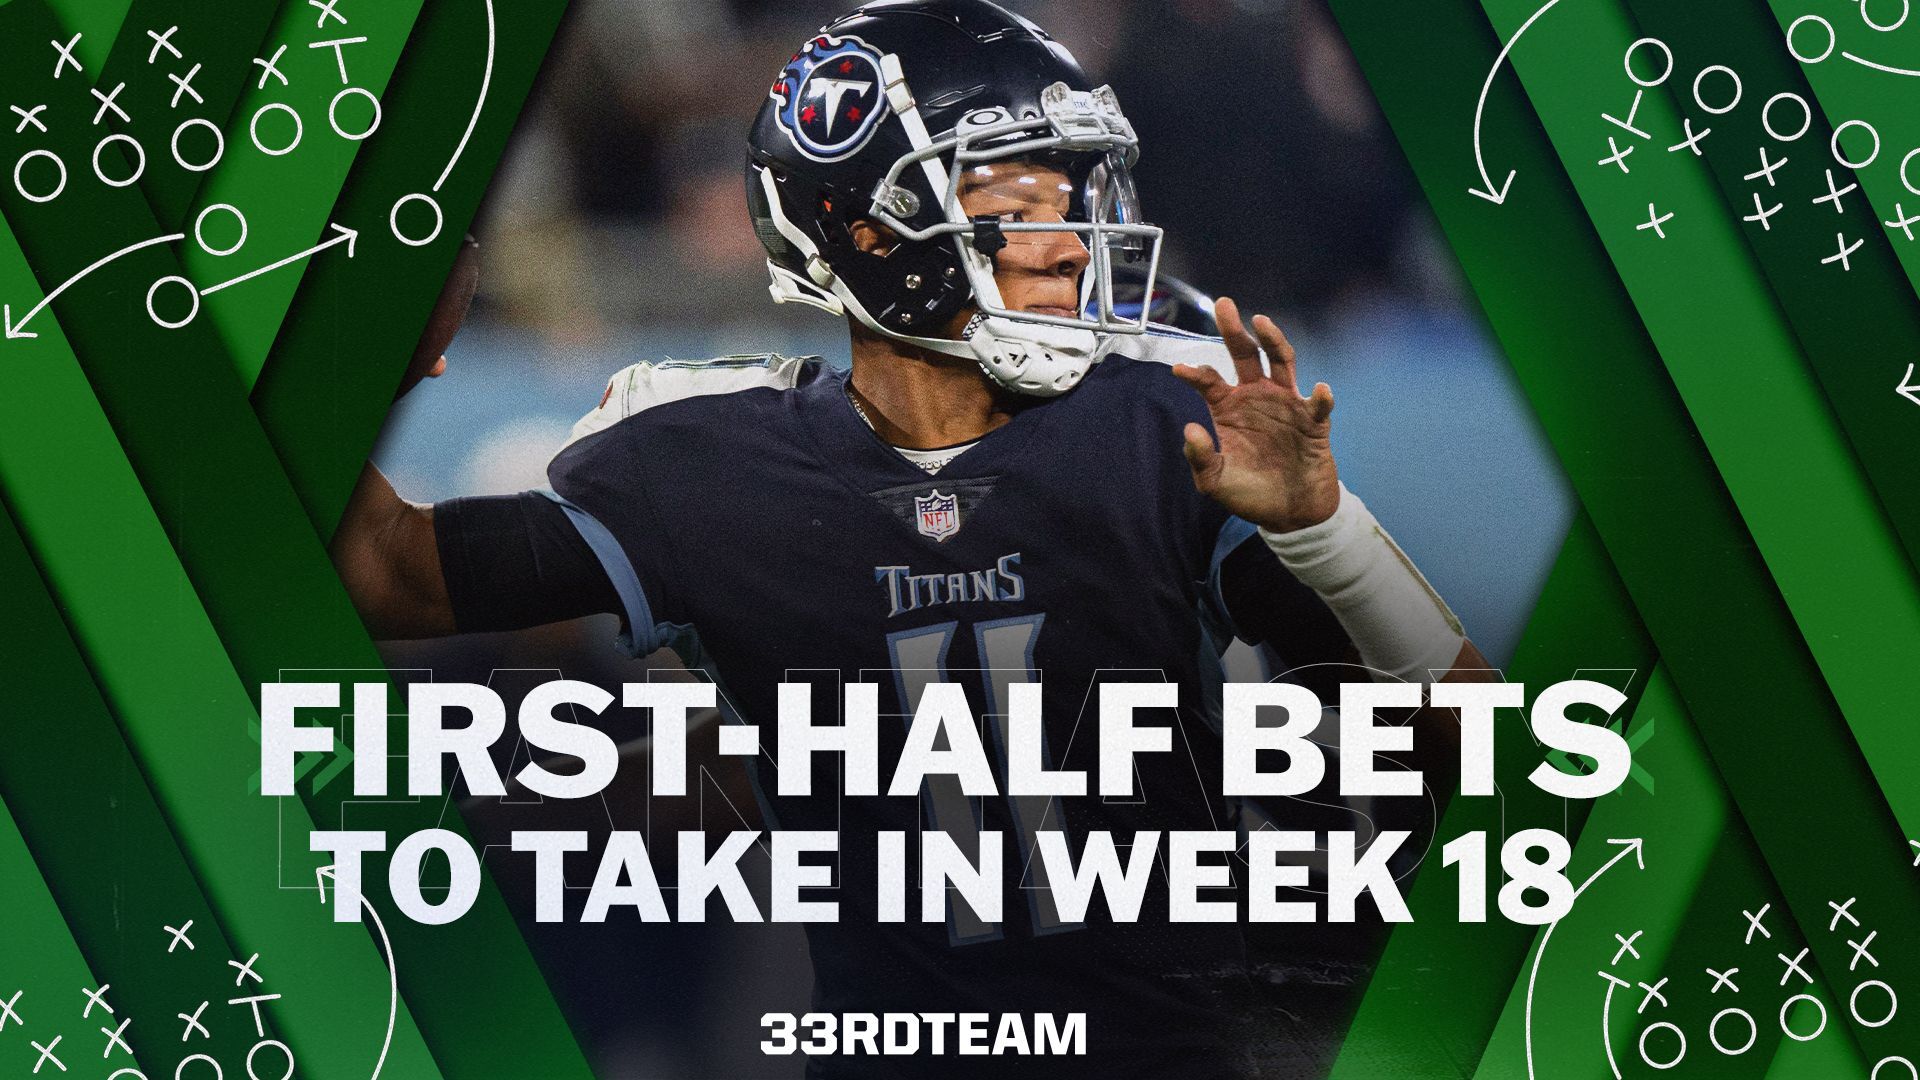 Bet on Quick Week 18 Starts for Titans, Steelers in Must-Win Games